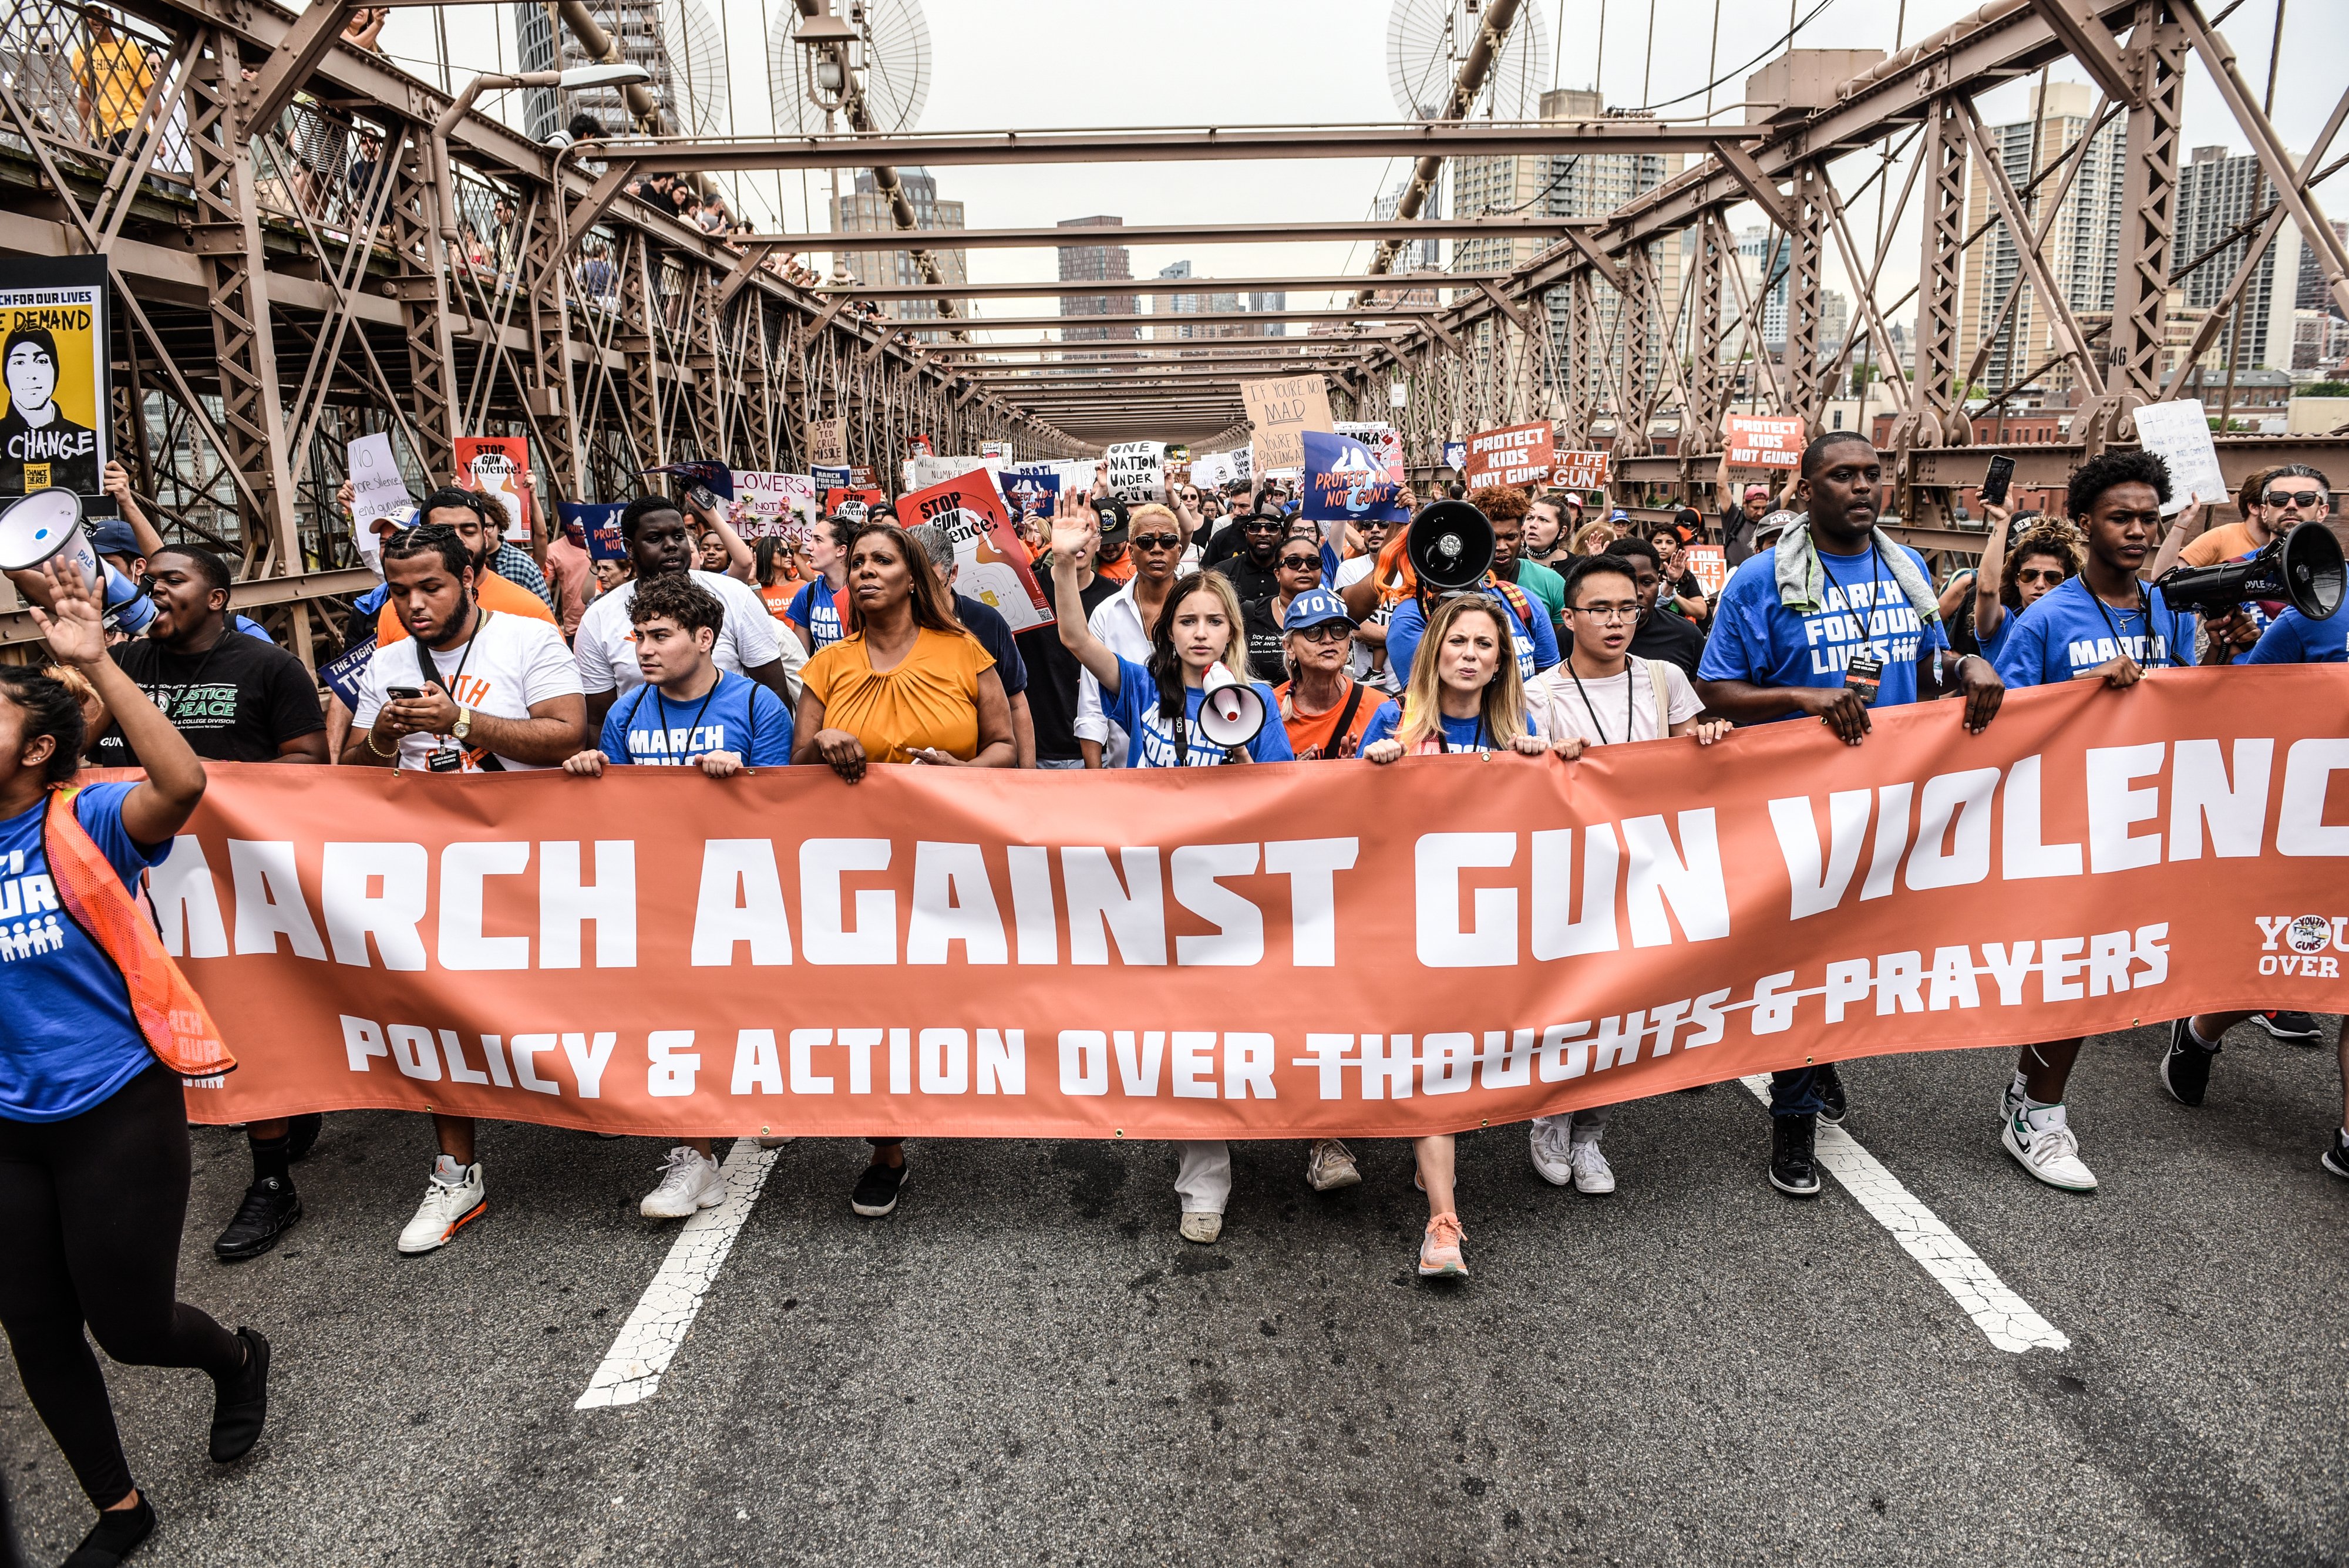 protestors crossing brooklyn bridge with orange march for our lives banner